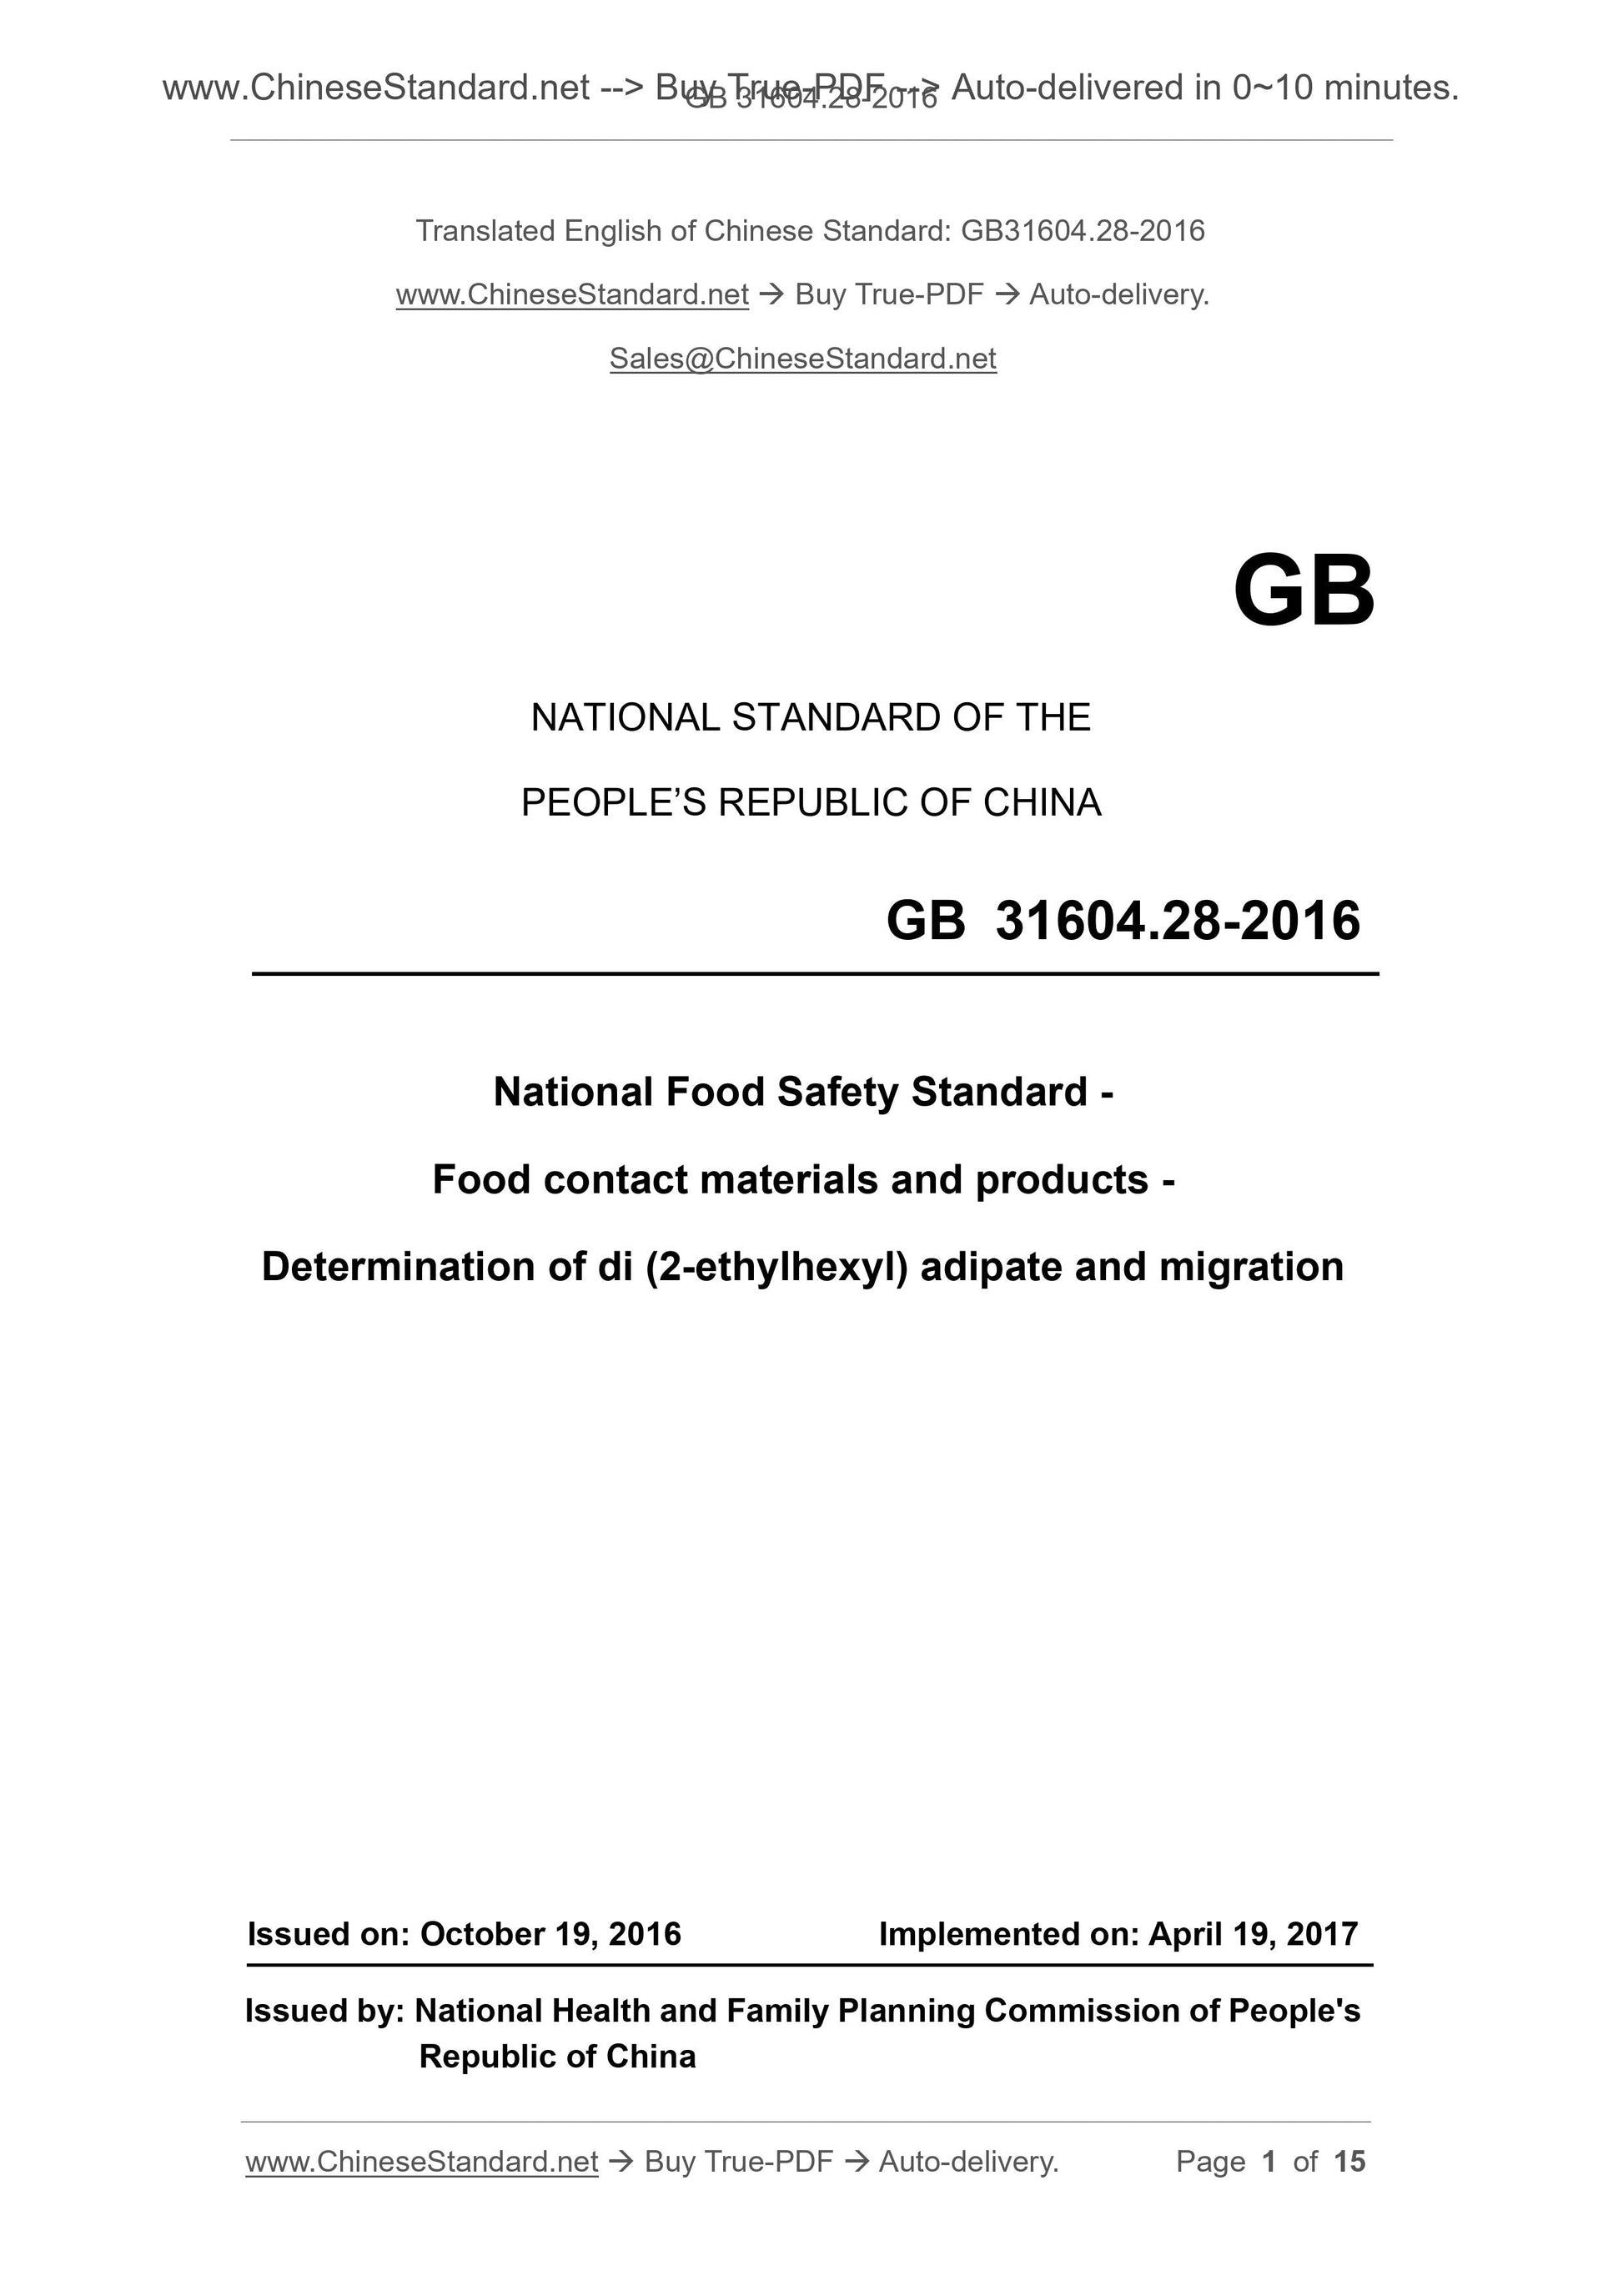 GB 31604.28-2016 Page 1